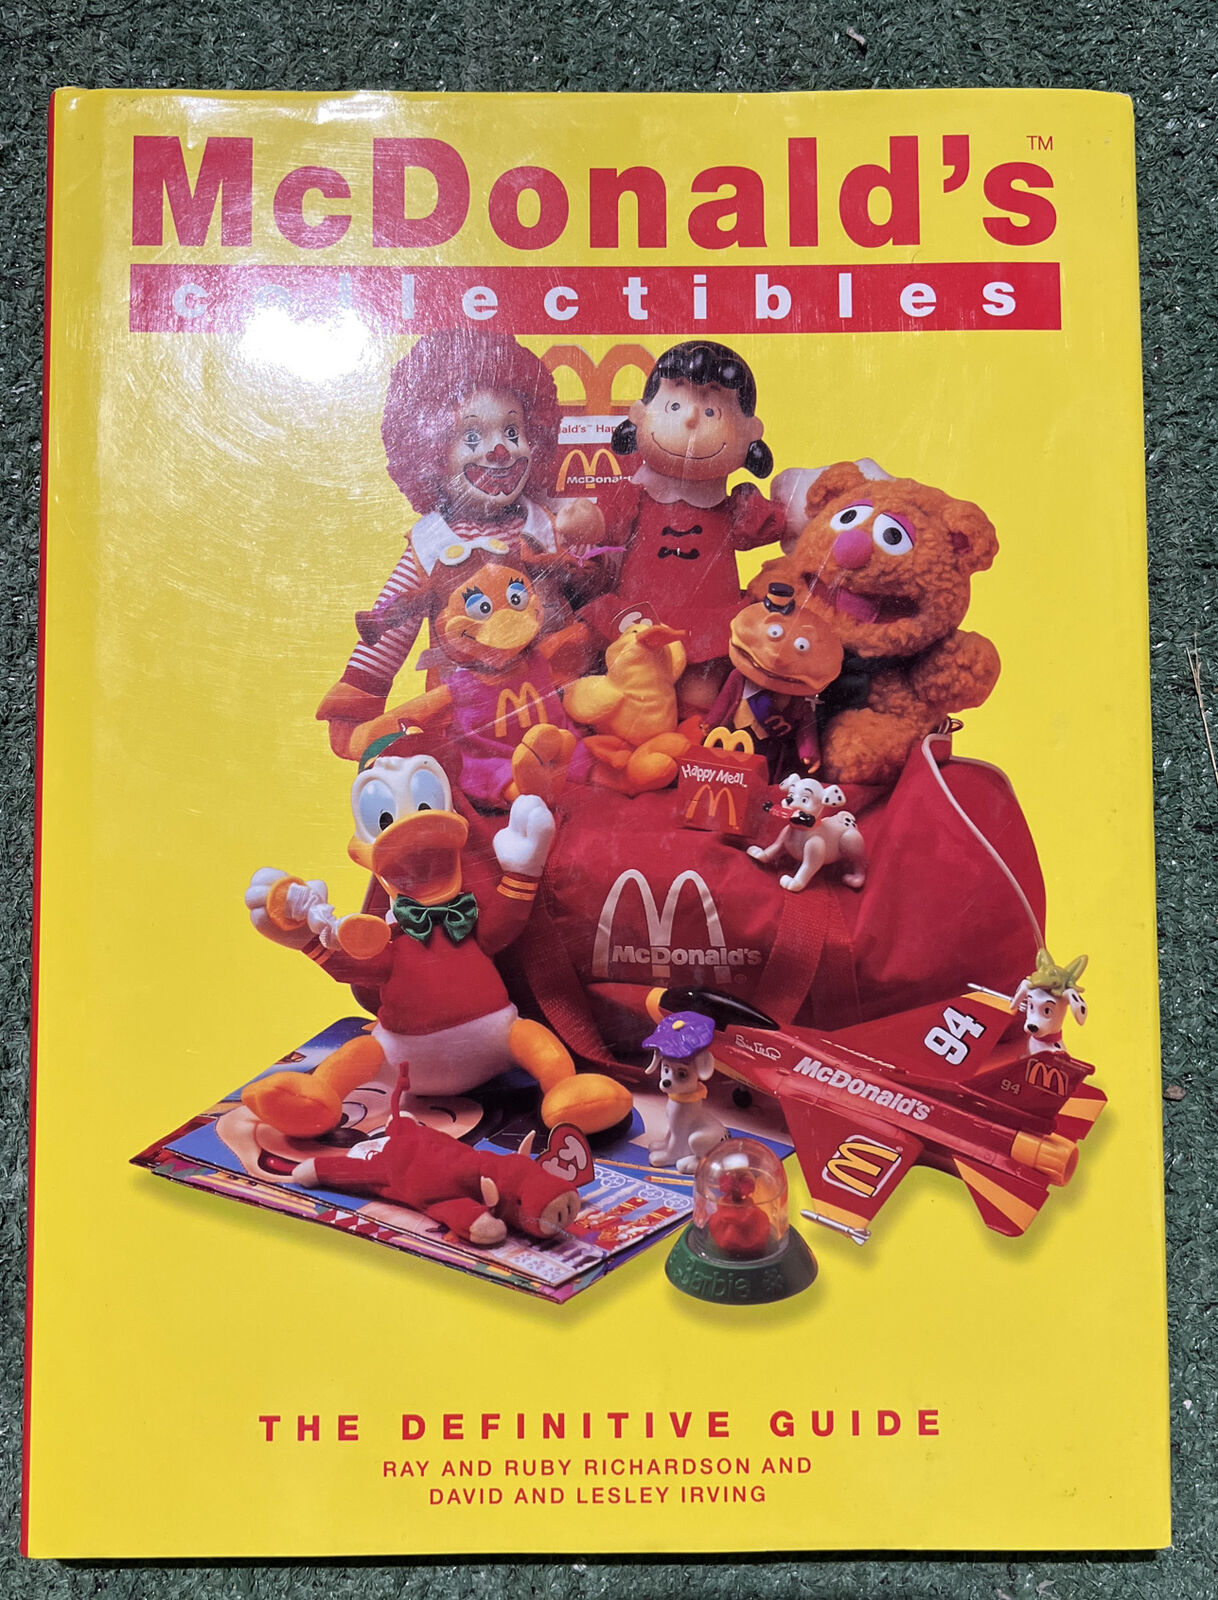 McDonald's Collectibales The Definitive Guide ~ 1997 Hardcover Book